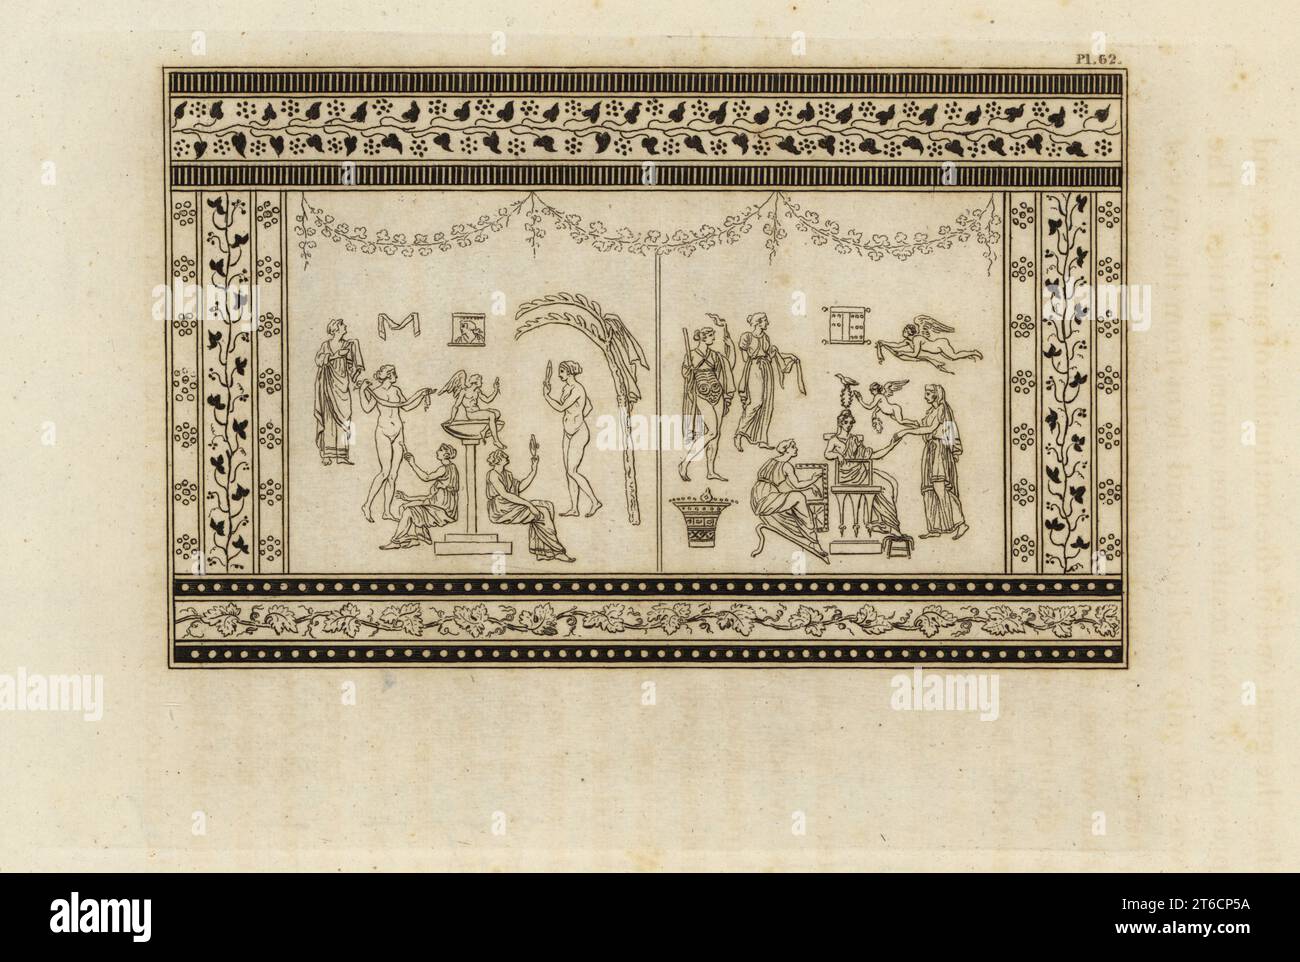 Ancient Roman ceremonies to Venus at Paphos. Venus is seated on a throne wearing a myrtle crown. A figure with torch represents Adonis. Priestesses offer fillets or ribbons to the tabernaculum holding the cistus. Copperplate engraving by Thomas Kirk (1765-1797) from Sir William Hamiltons Outlines from the Figures and Compositions upon the Greek, Roman and Etruscan Vases of the Late Sir Hamilton, T. MLean, London, 1834. Stock Photo